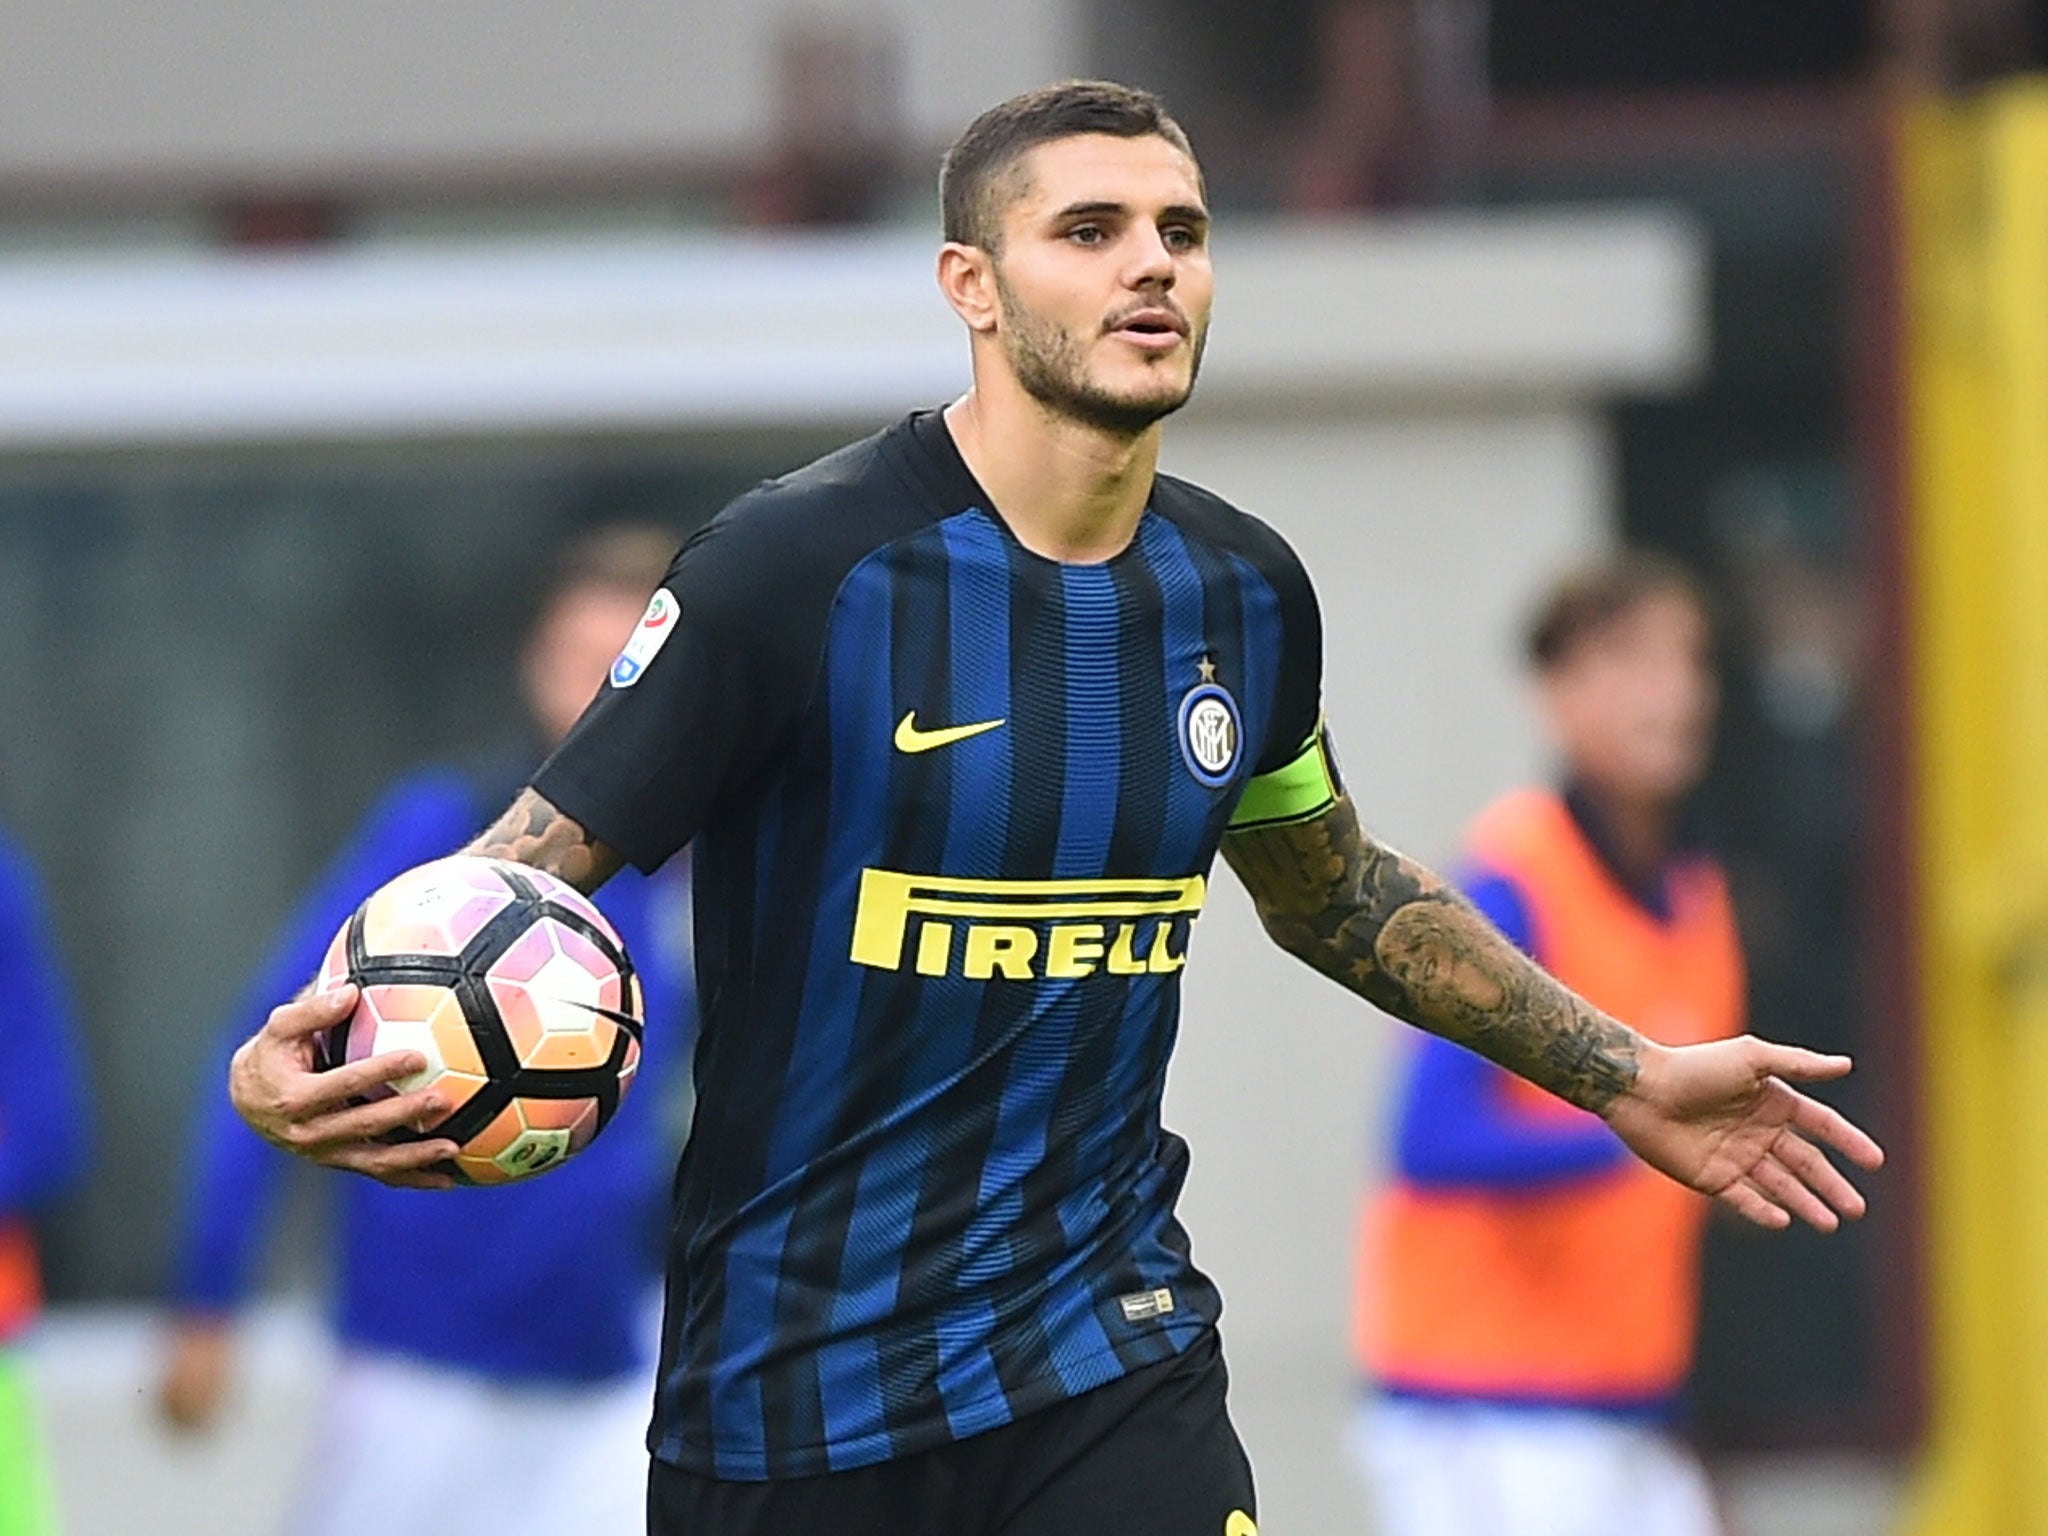 Inter Milan fans call Mauro Icardi 'vile piece of s***' and demand